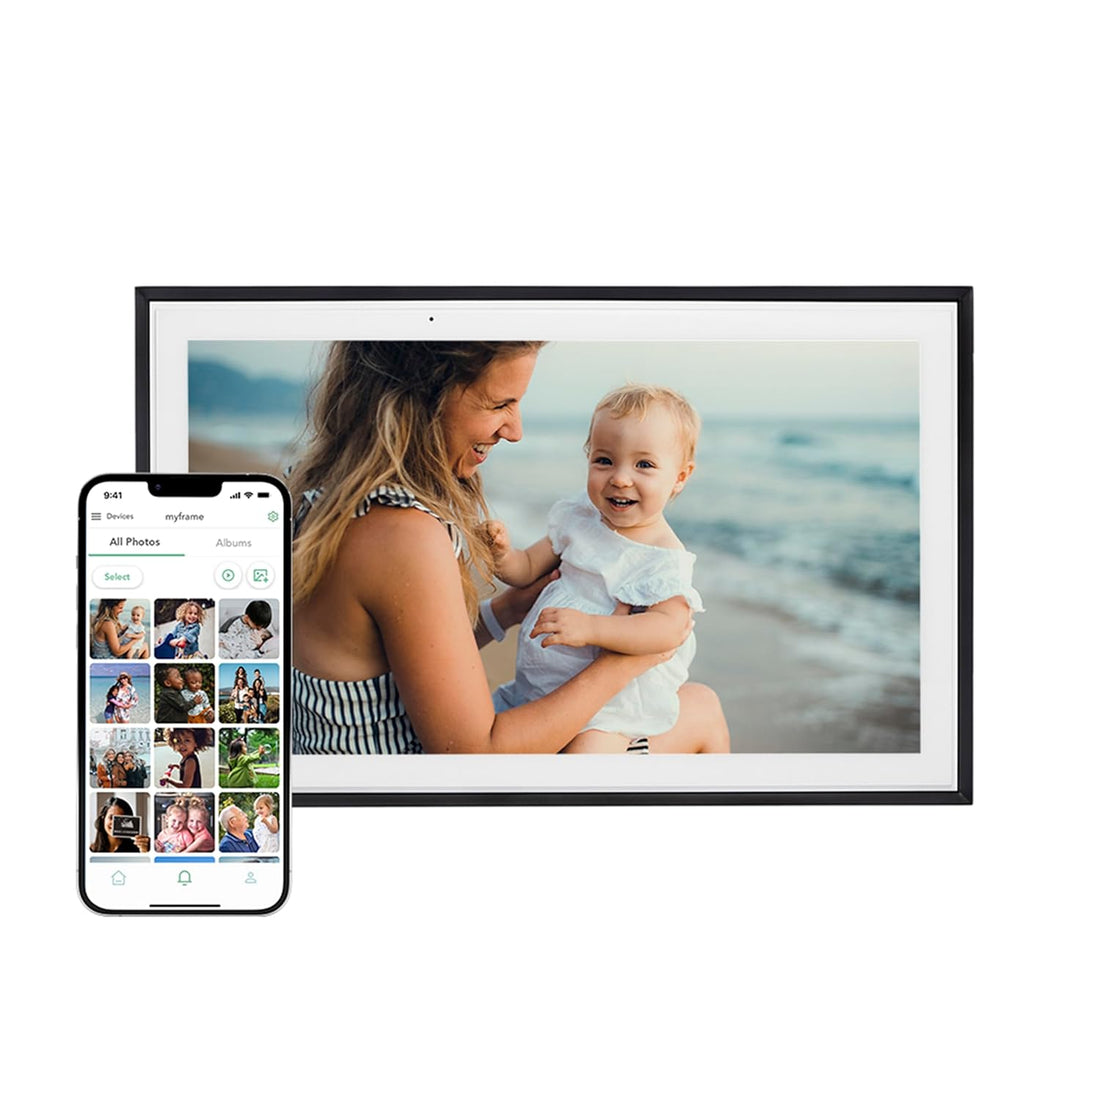 Skylight Frame: 15 inch WiFi Digital Picture Frame with Load from Phone Capability, Touch Screen Digital Photo Frame Display - Gift for Friends and Family